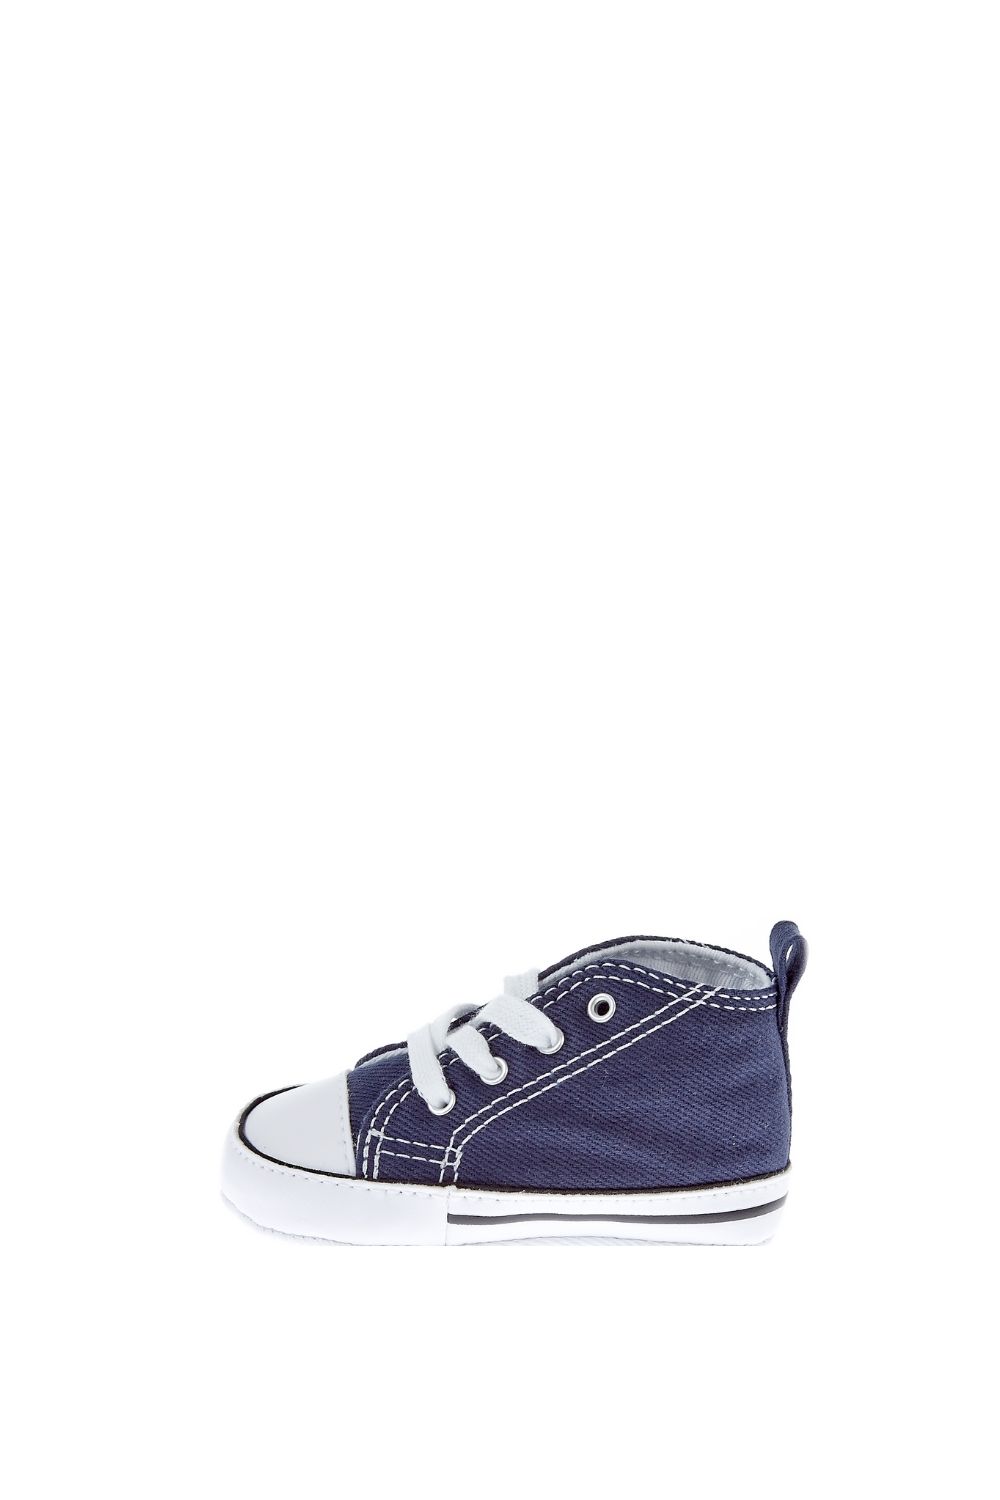 CONVERSE - Βρεφικά παπούτσια Chuck Taylor μπλε Παιδικά/Baby/Παπούτσια/Sneakers